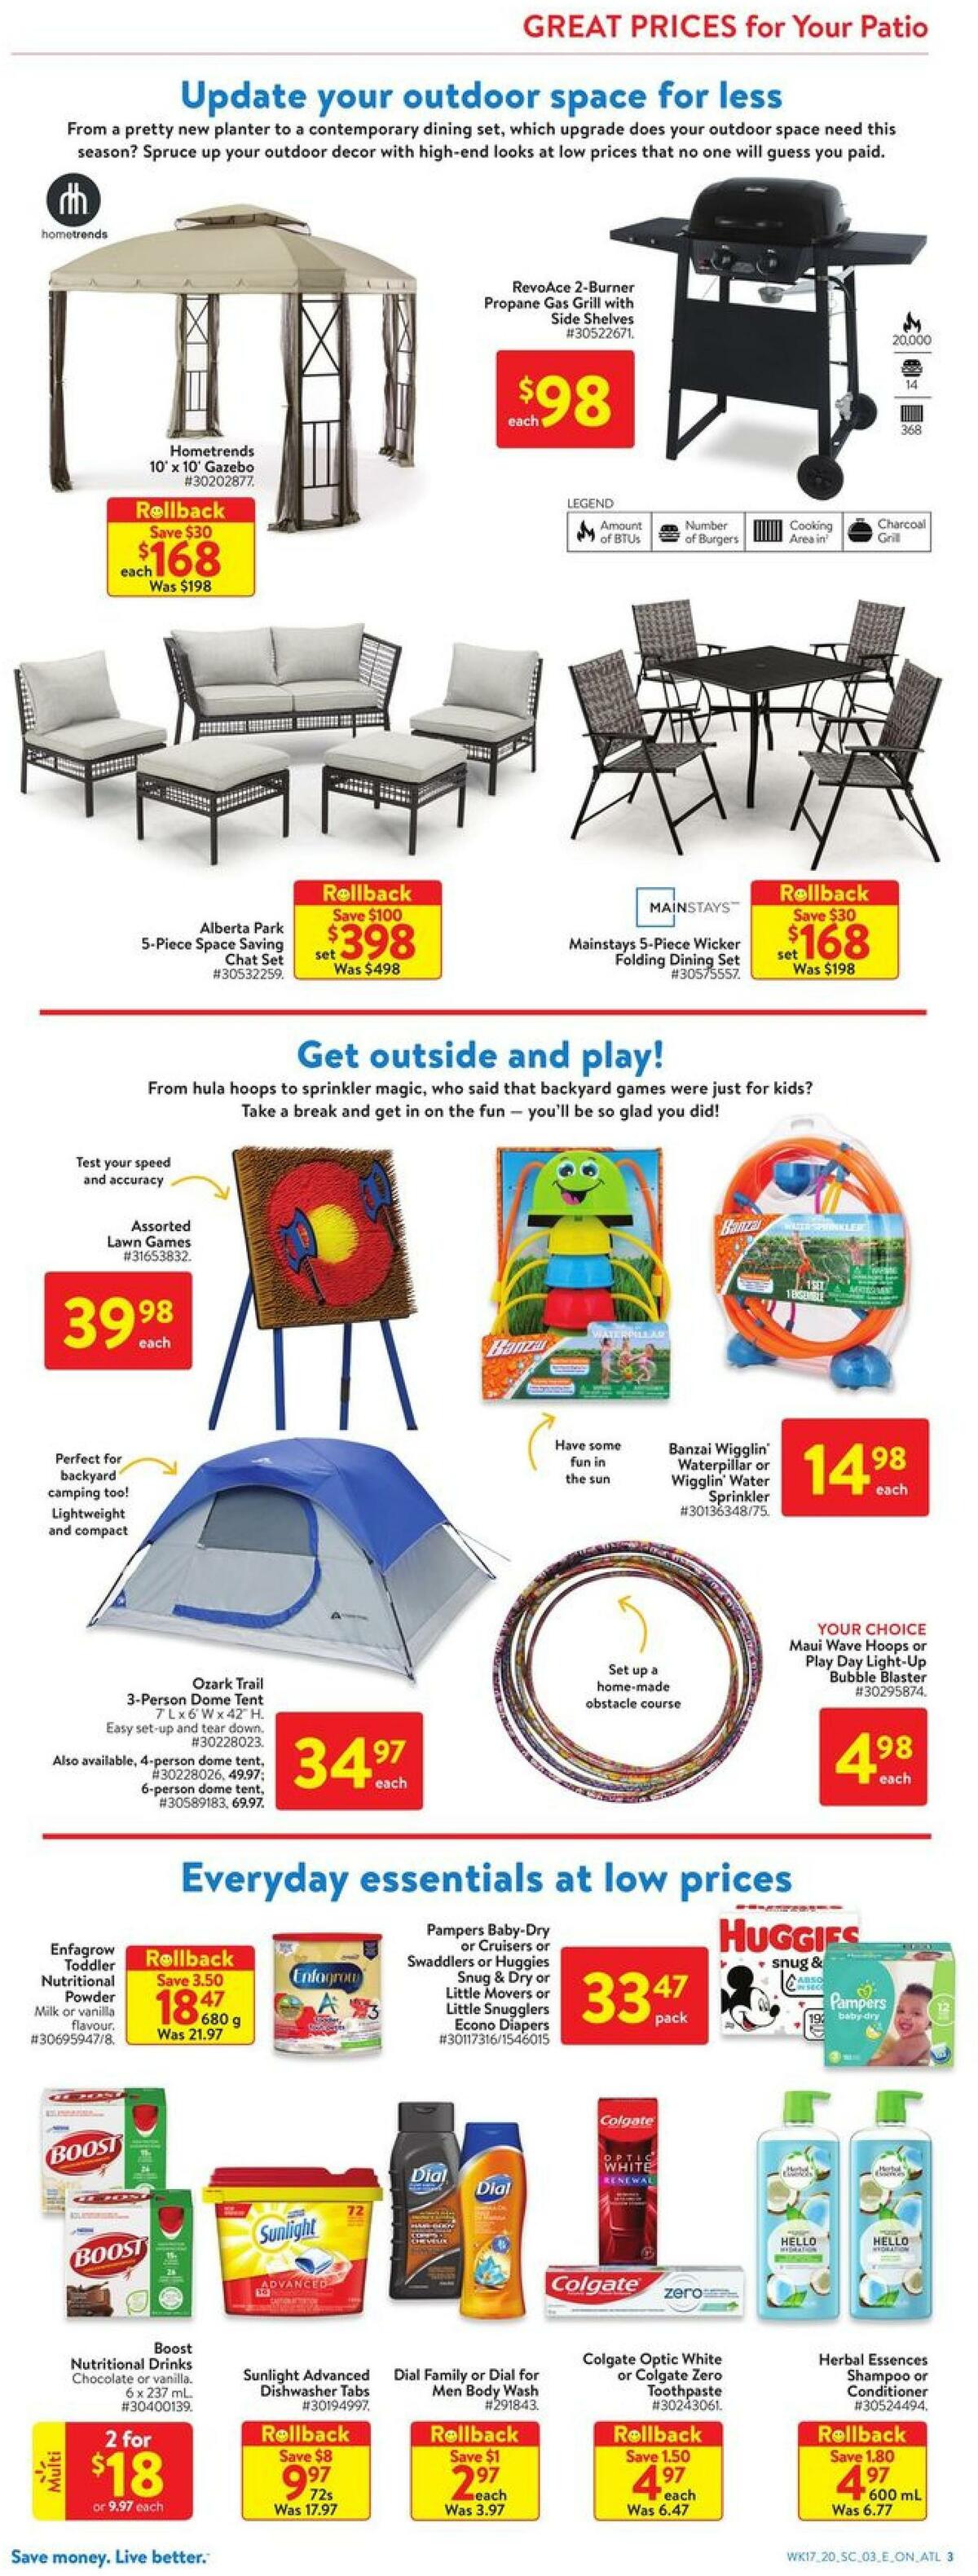 Walmart Flyer from May 21